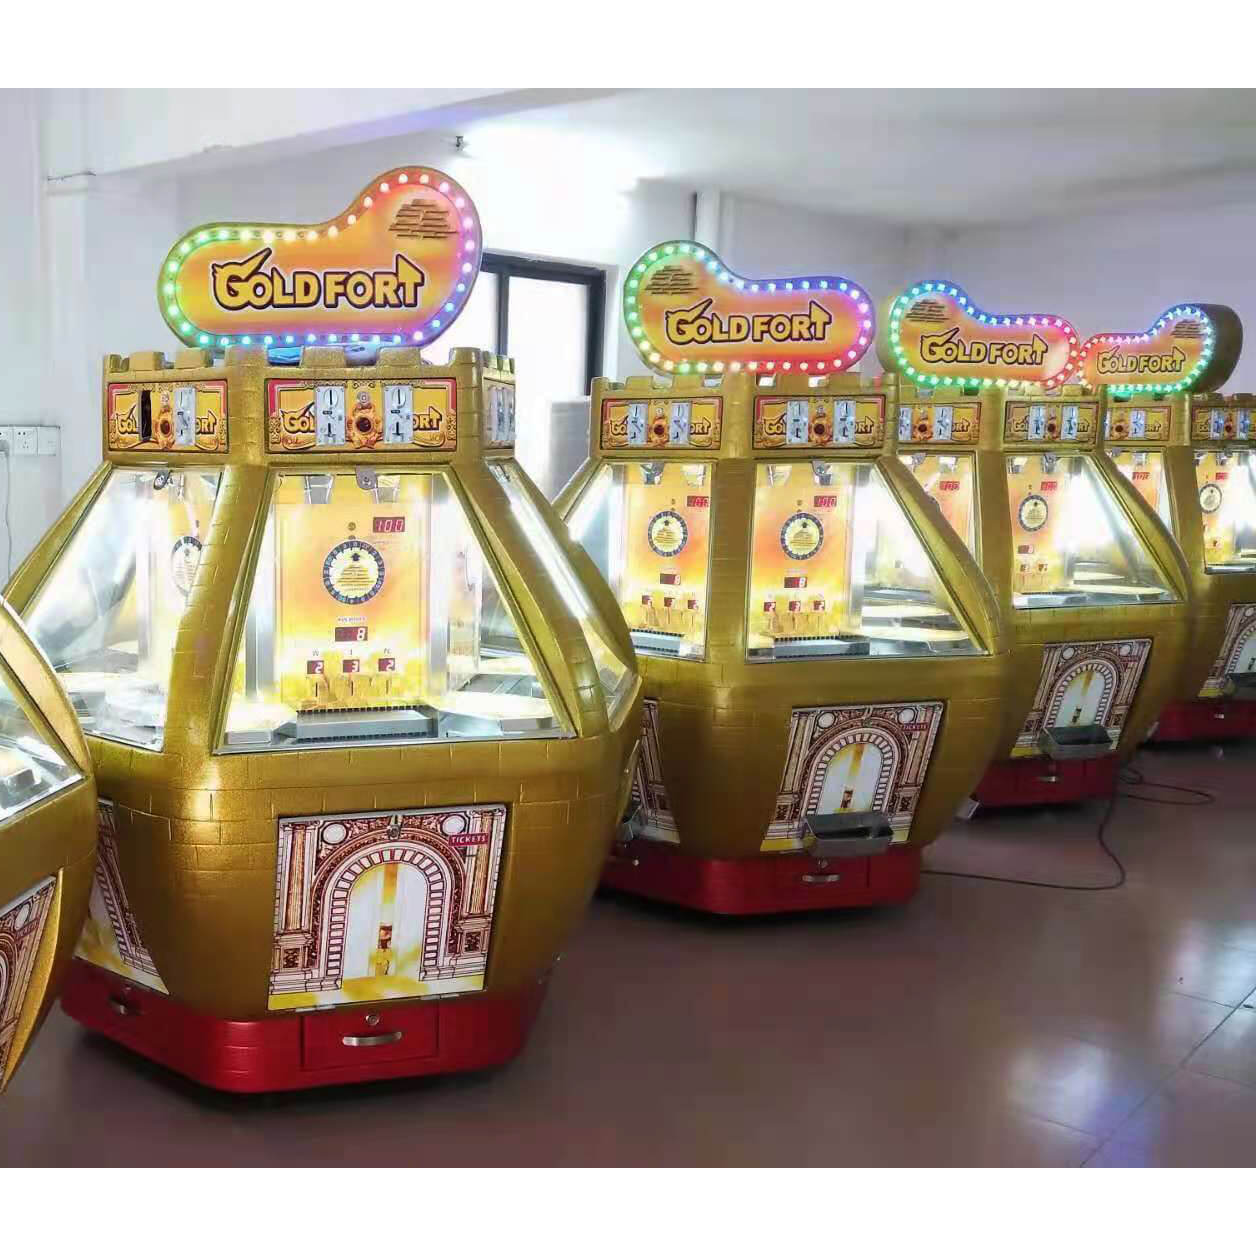 Gold-fort-coin-pusher-machine-for-6-players-5